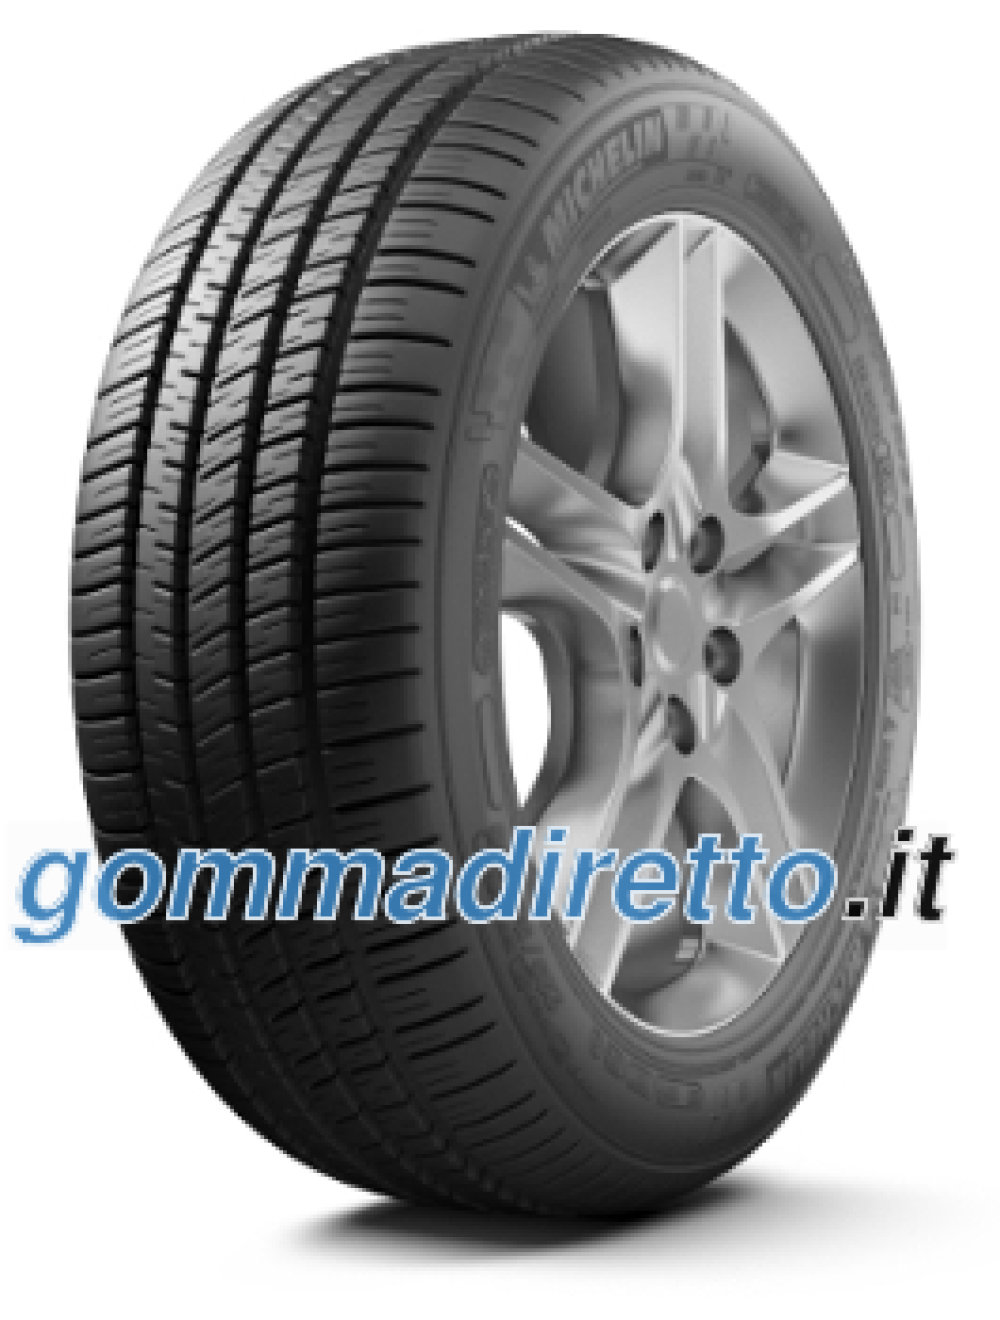 Image of Michelin Pilot Sport A/S 3 ( 305/40 R20 112V XL, N0 )